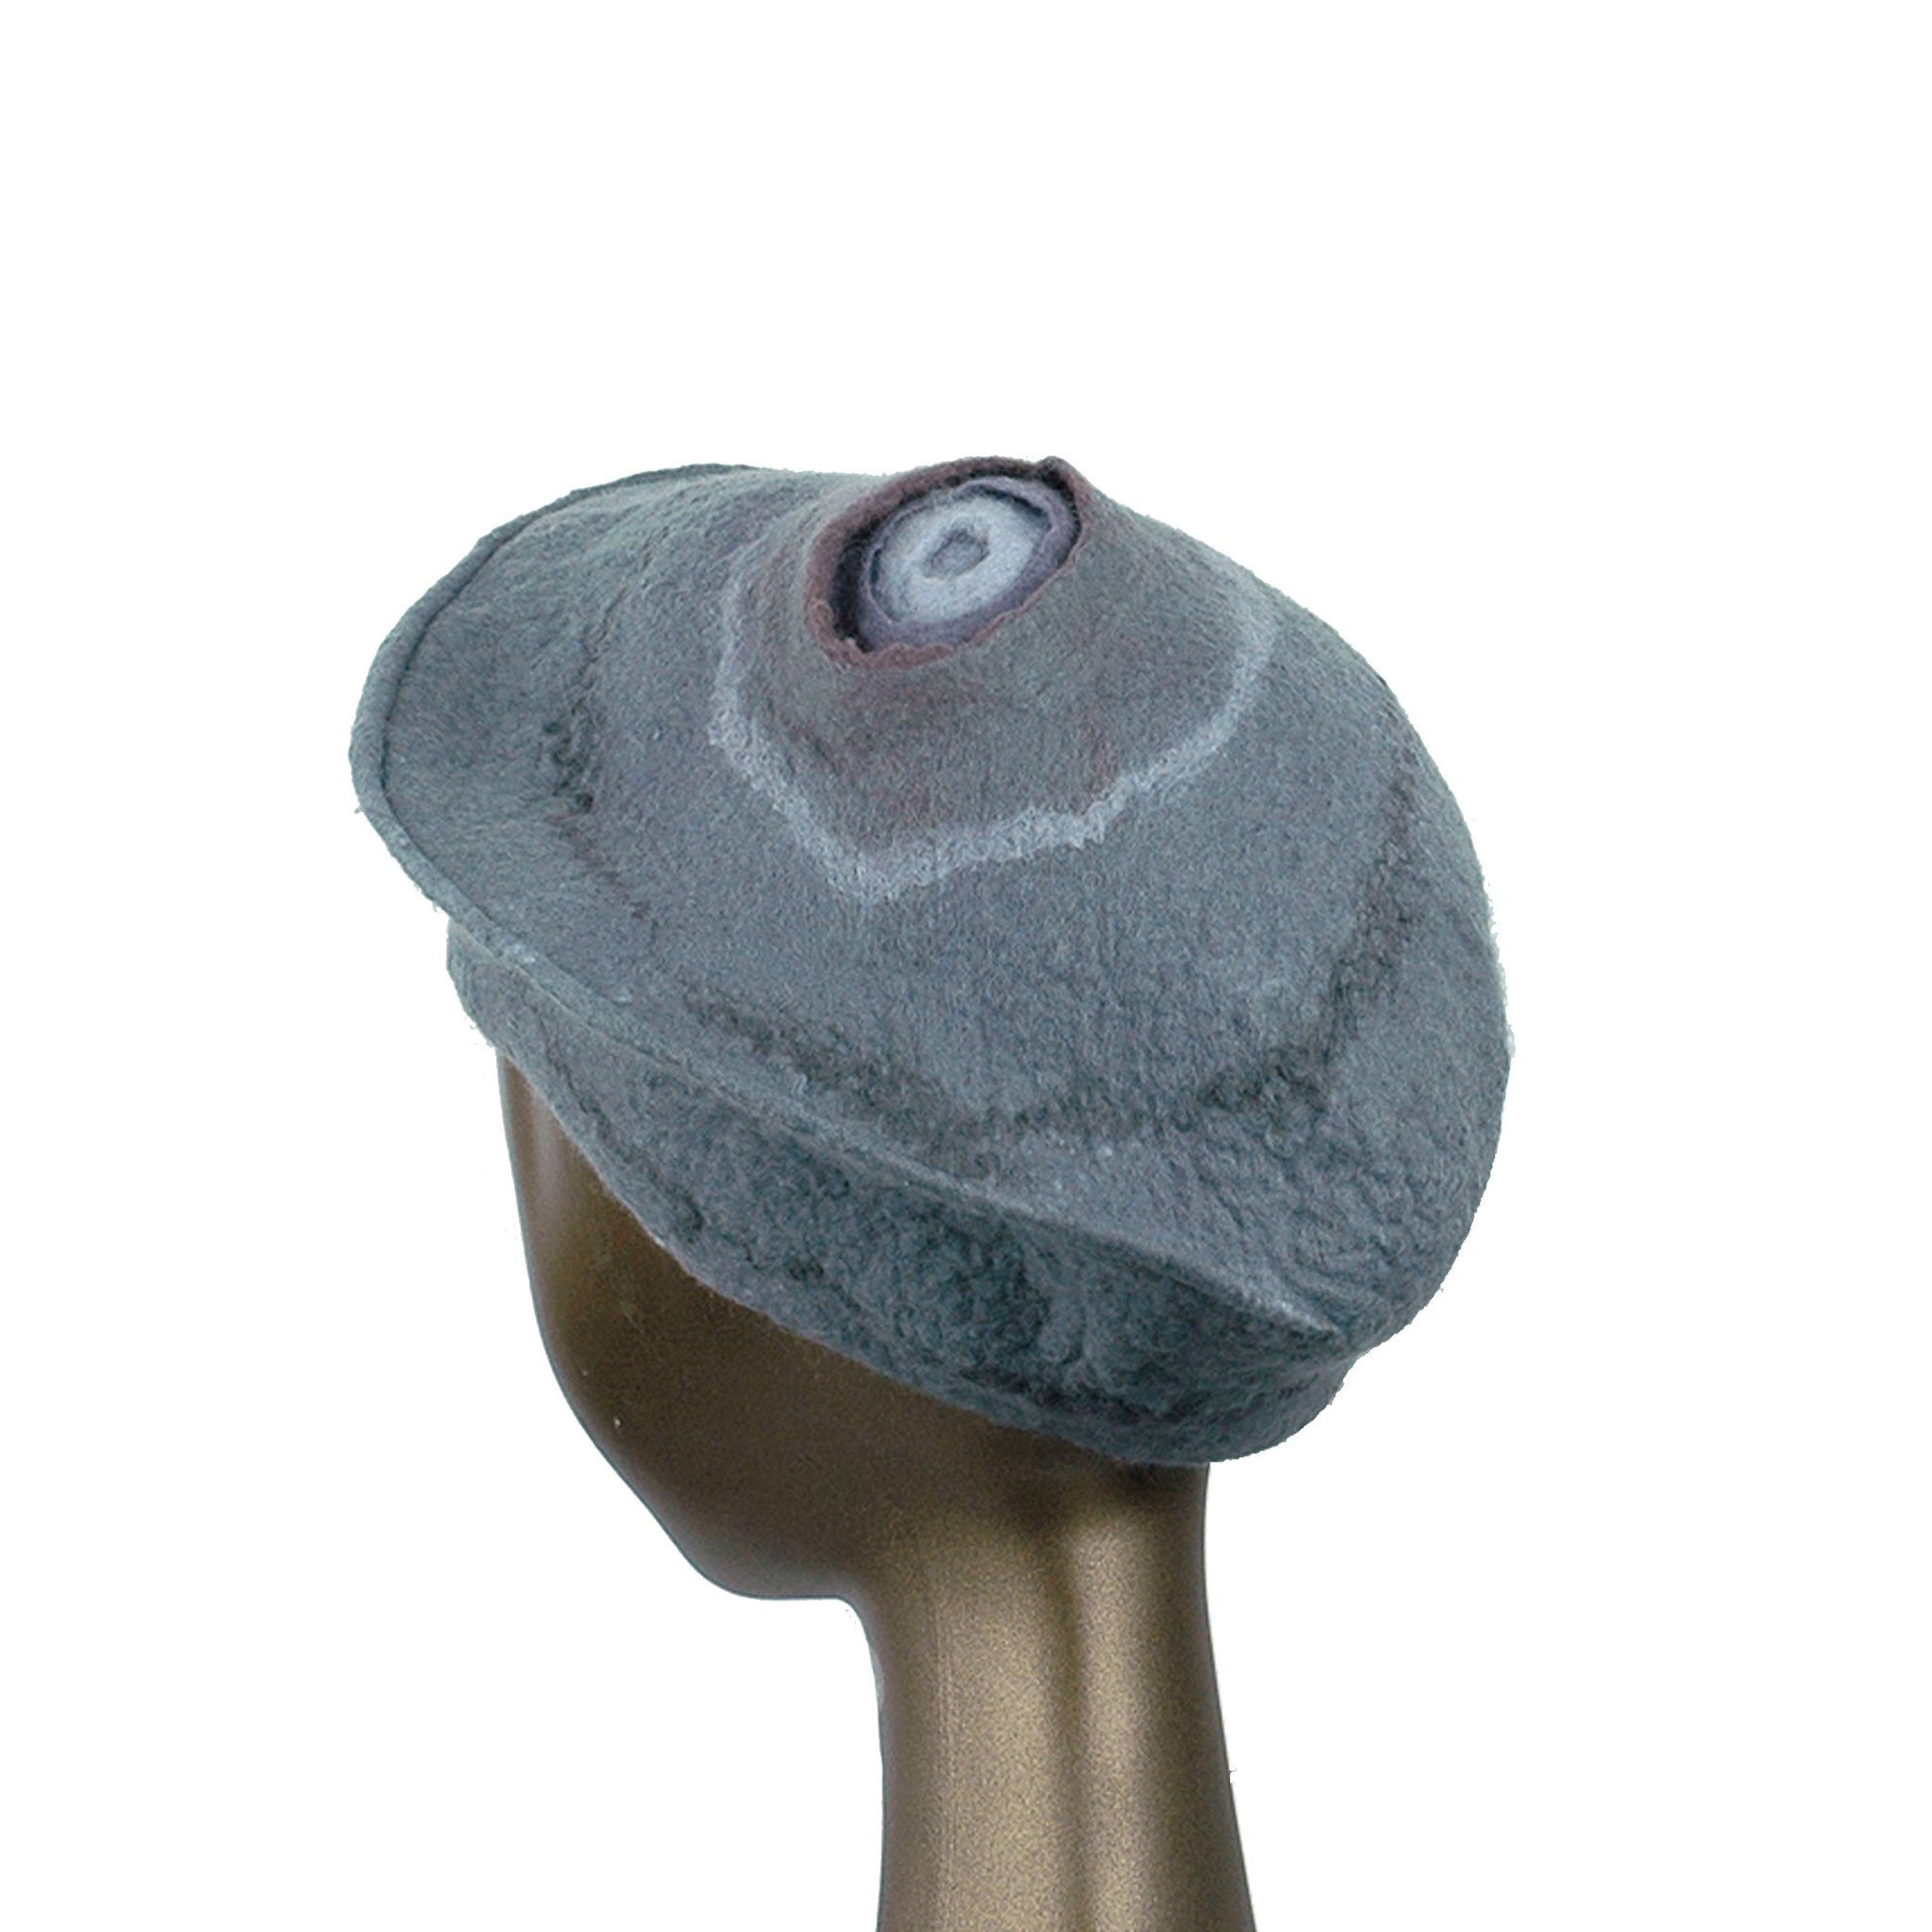 Gray Felted Beret with Crater on Top - back view